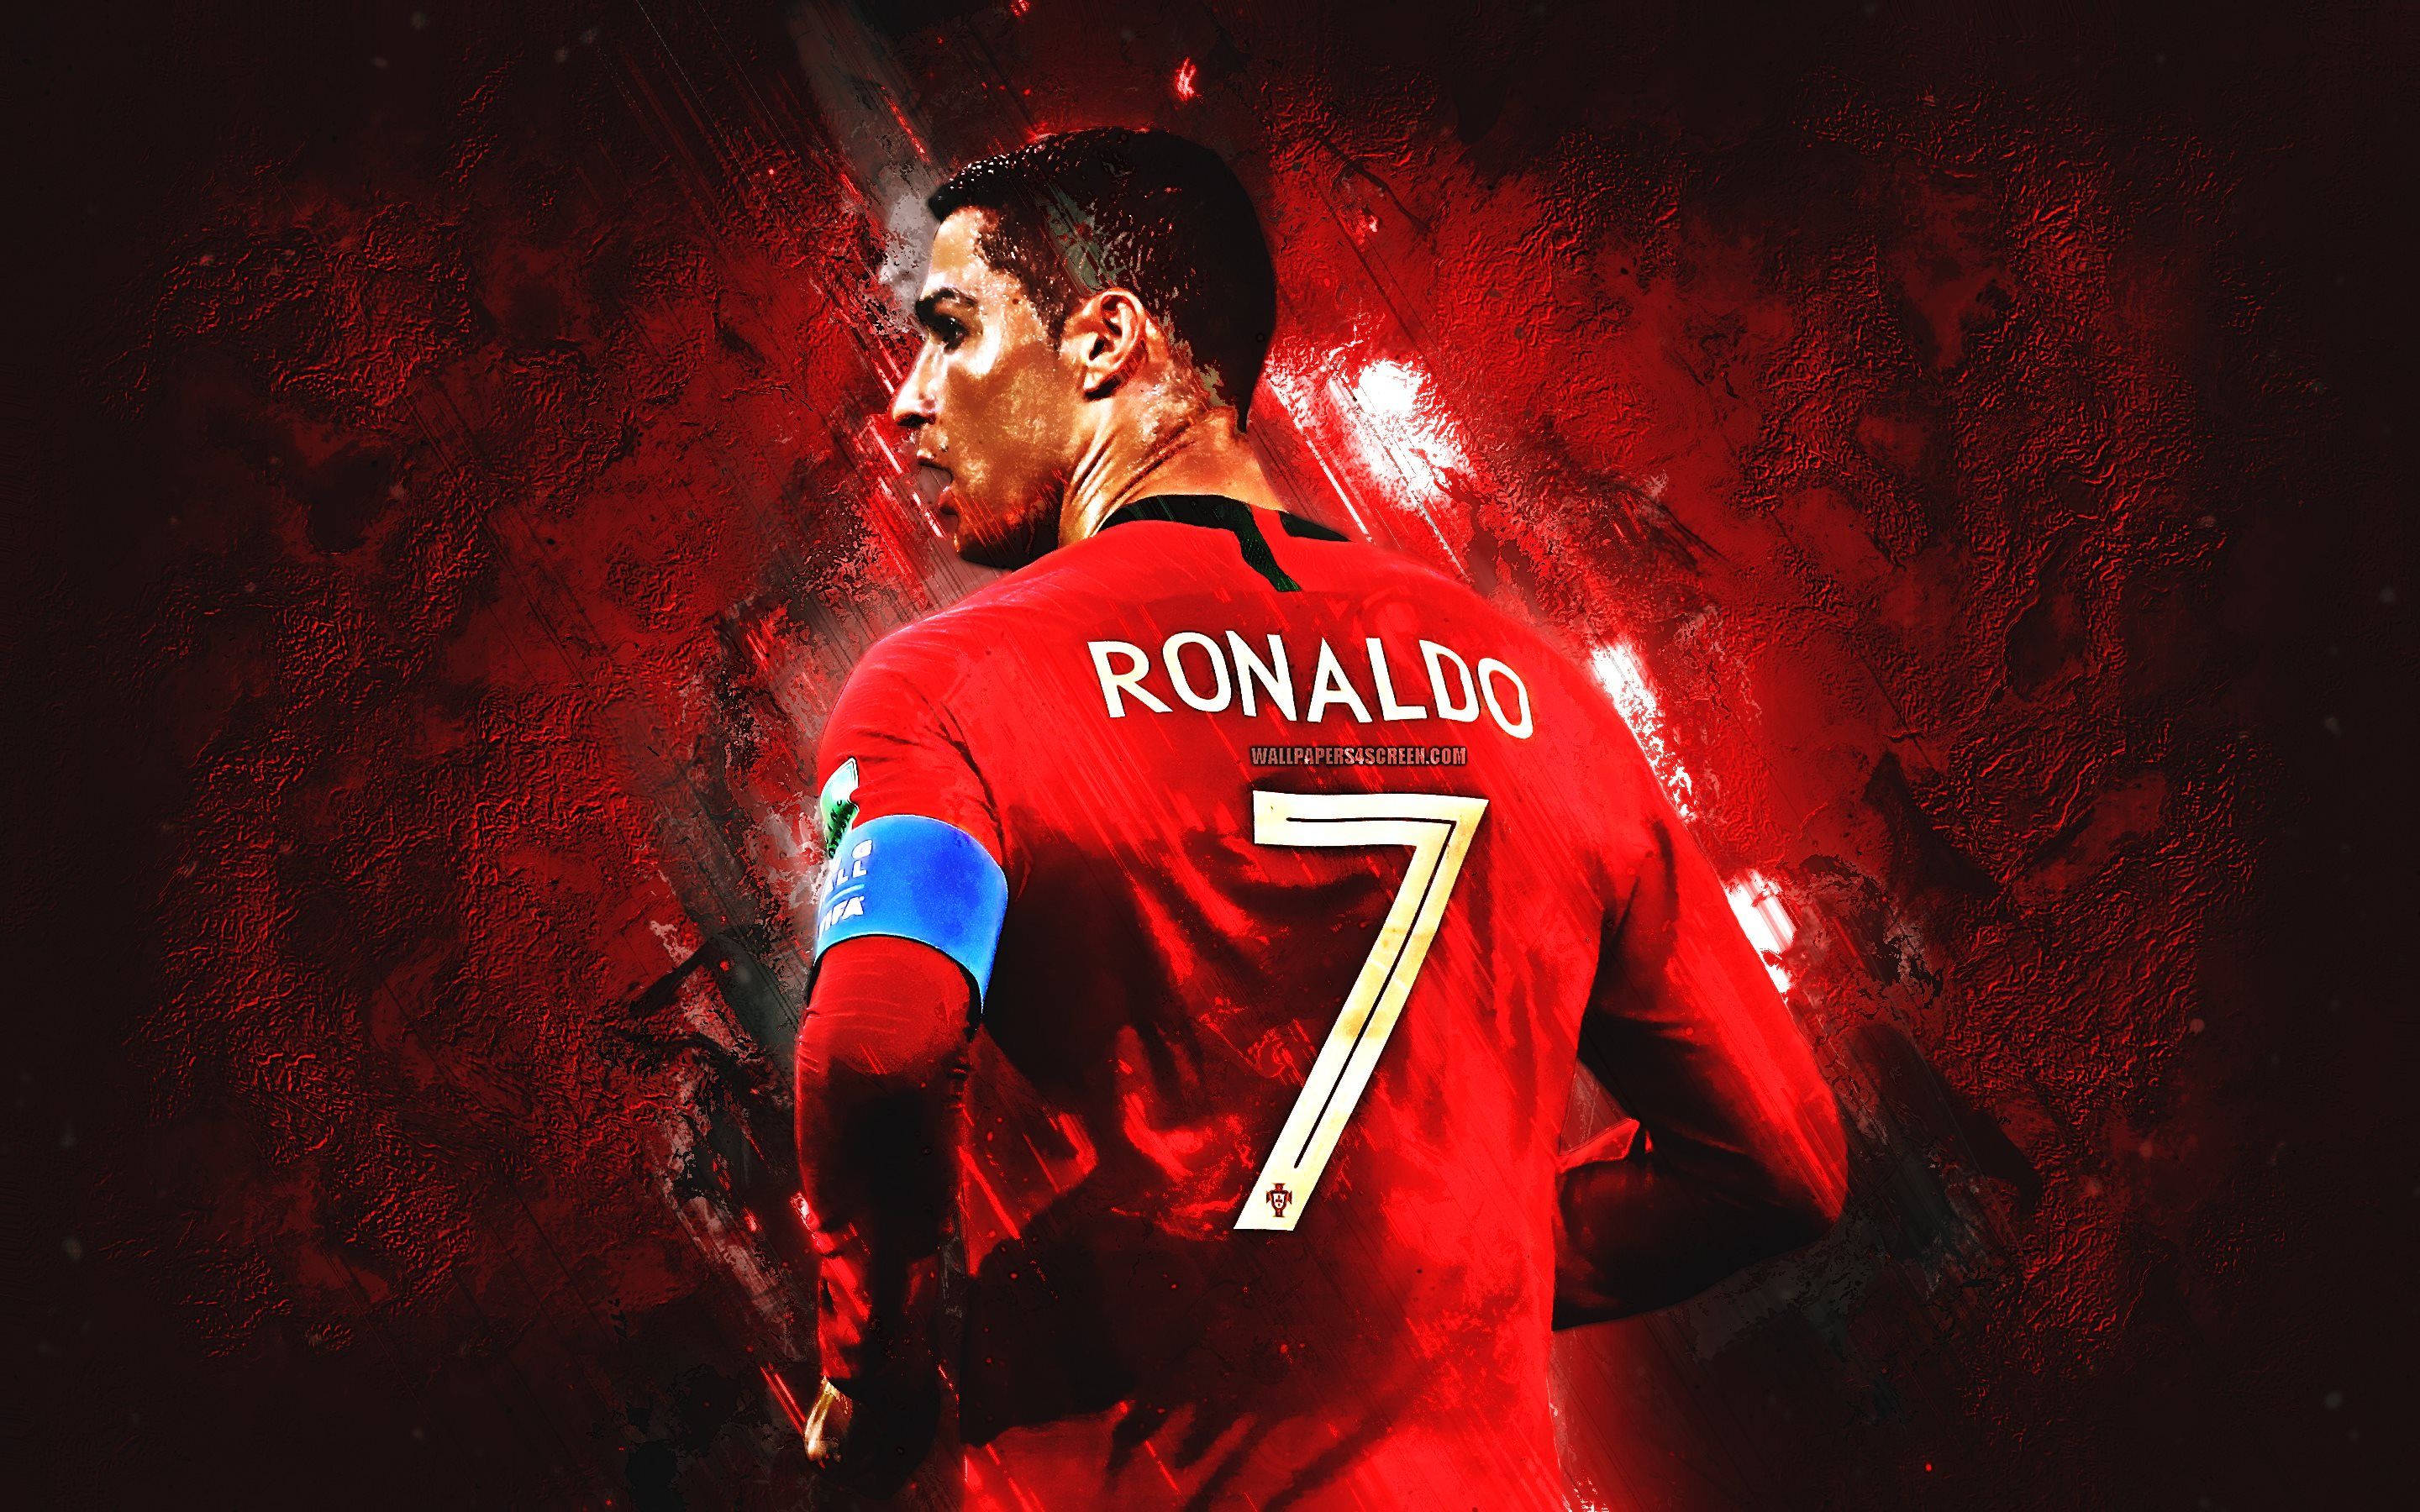 Download wallpaper Cristiano Ronaldo, grunge, Portugal National Team, soccer, CR back view, Portuguese football team for desktop with resolution 2880x1800. High Quality HD picture wallpaper